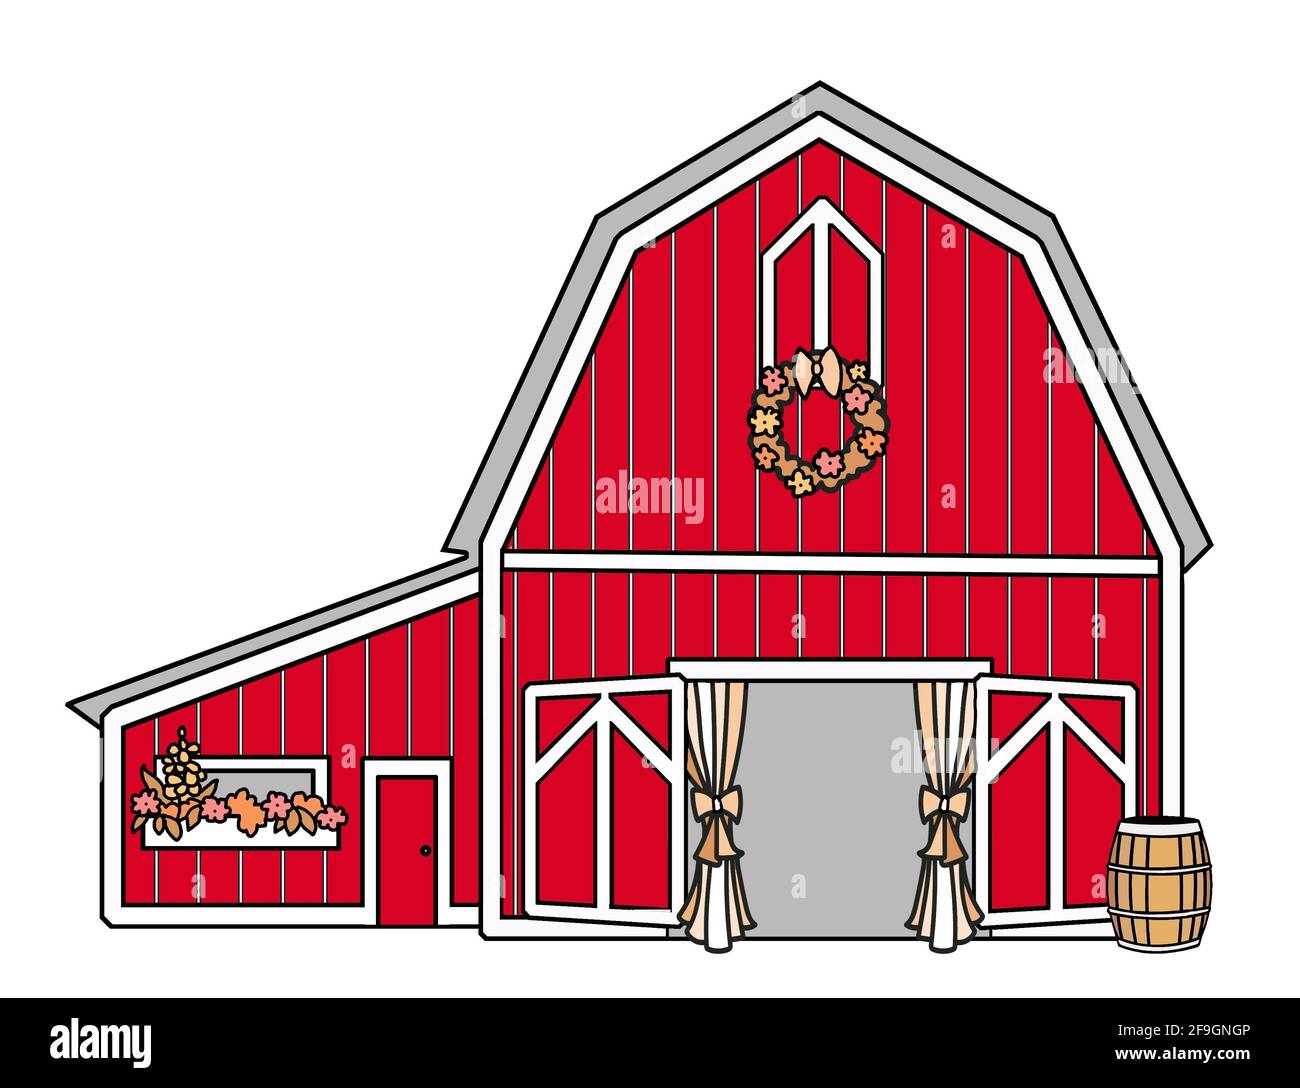 Illustration clip art of a red barn decorated for a special event or wedding. Stock Photo